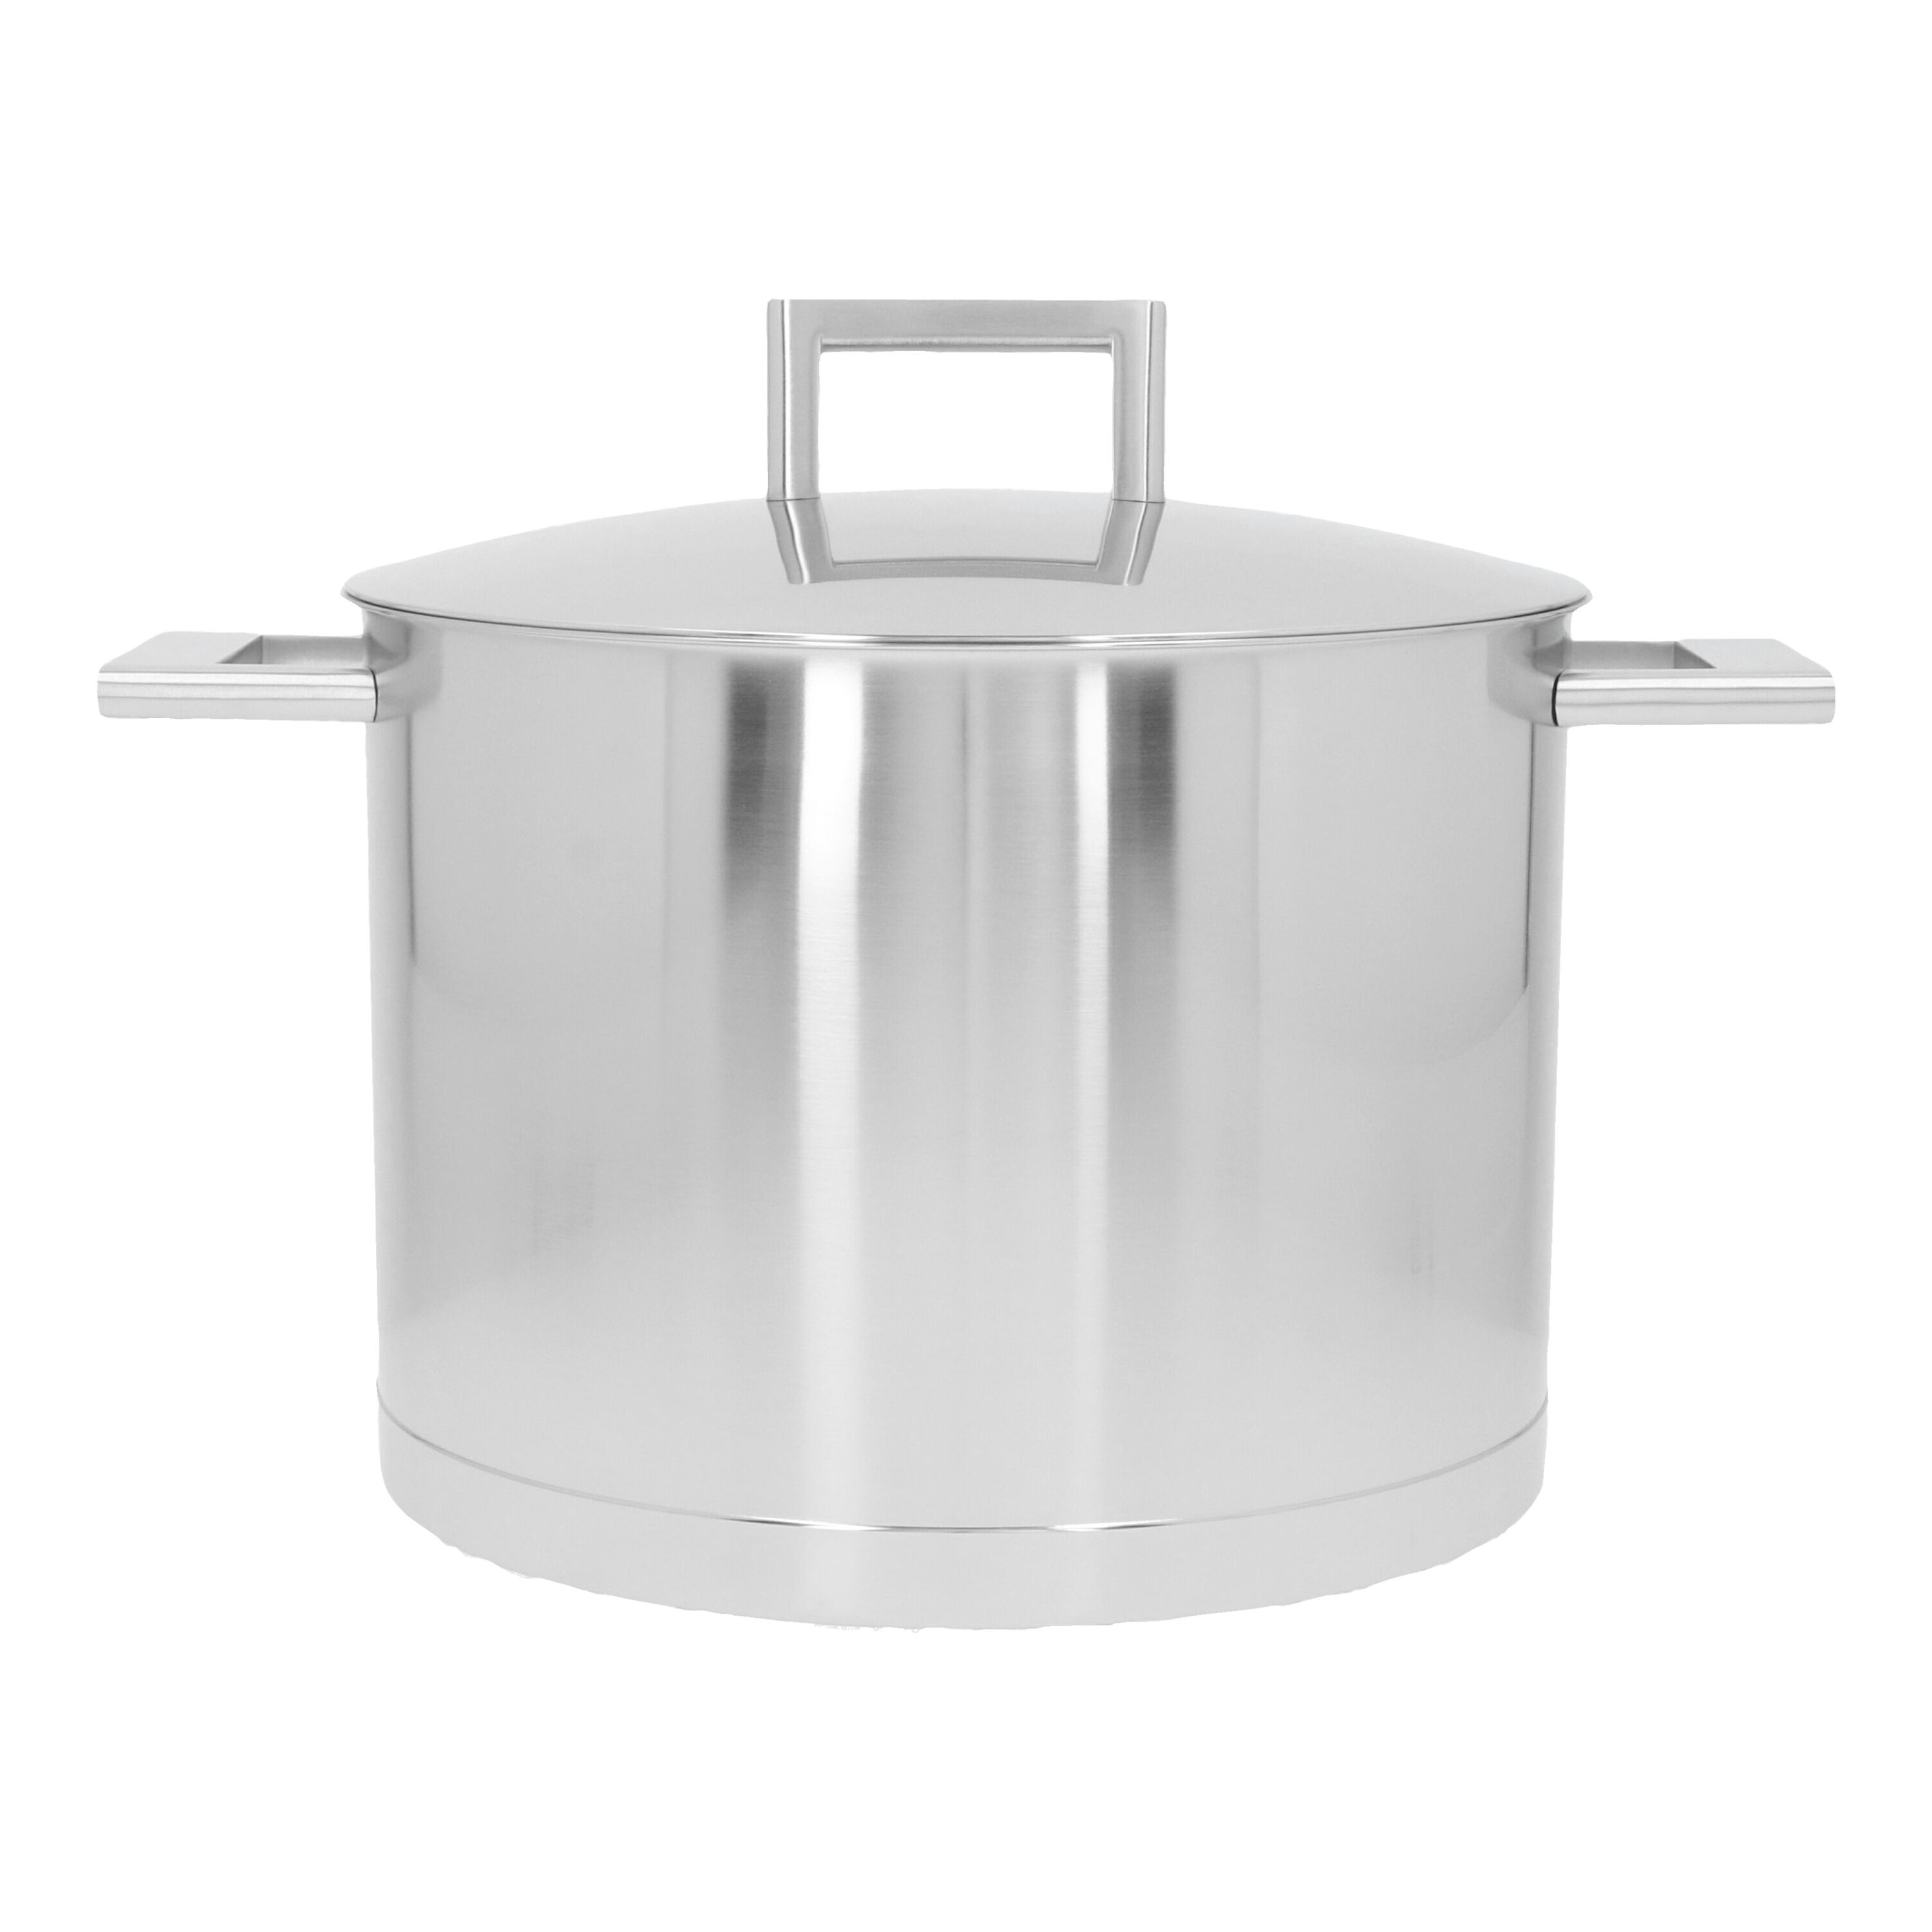 Paragon 598120 3 Qt. Stainless Steel Bain Marie Pot with Lid